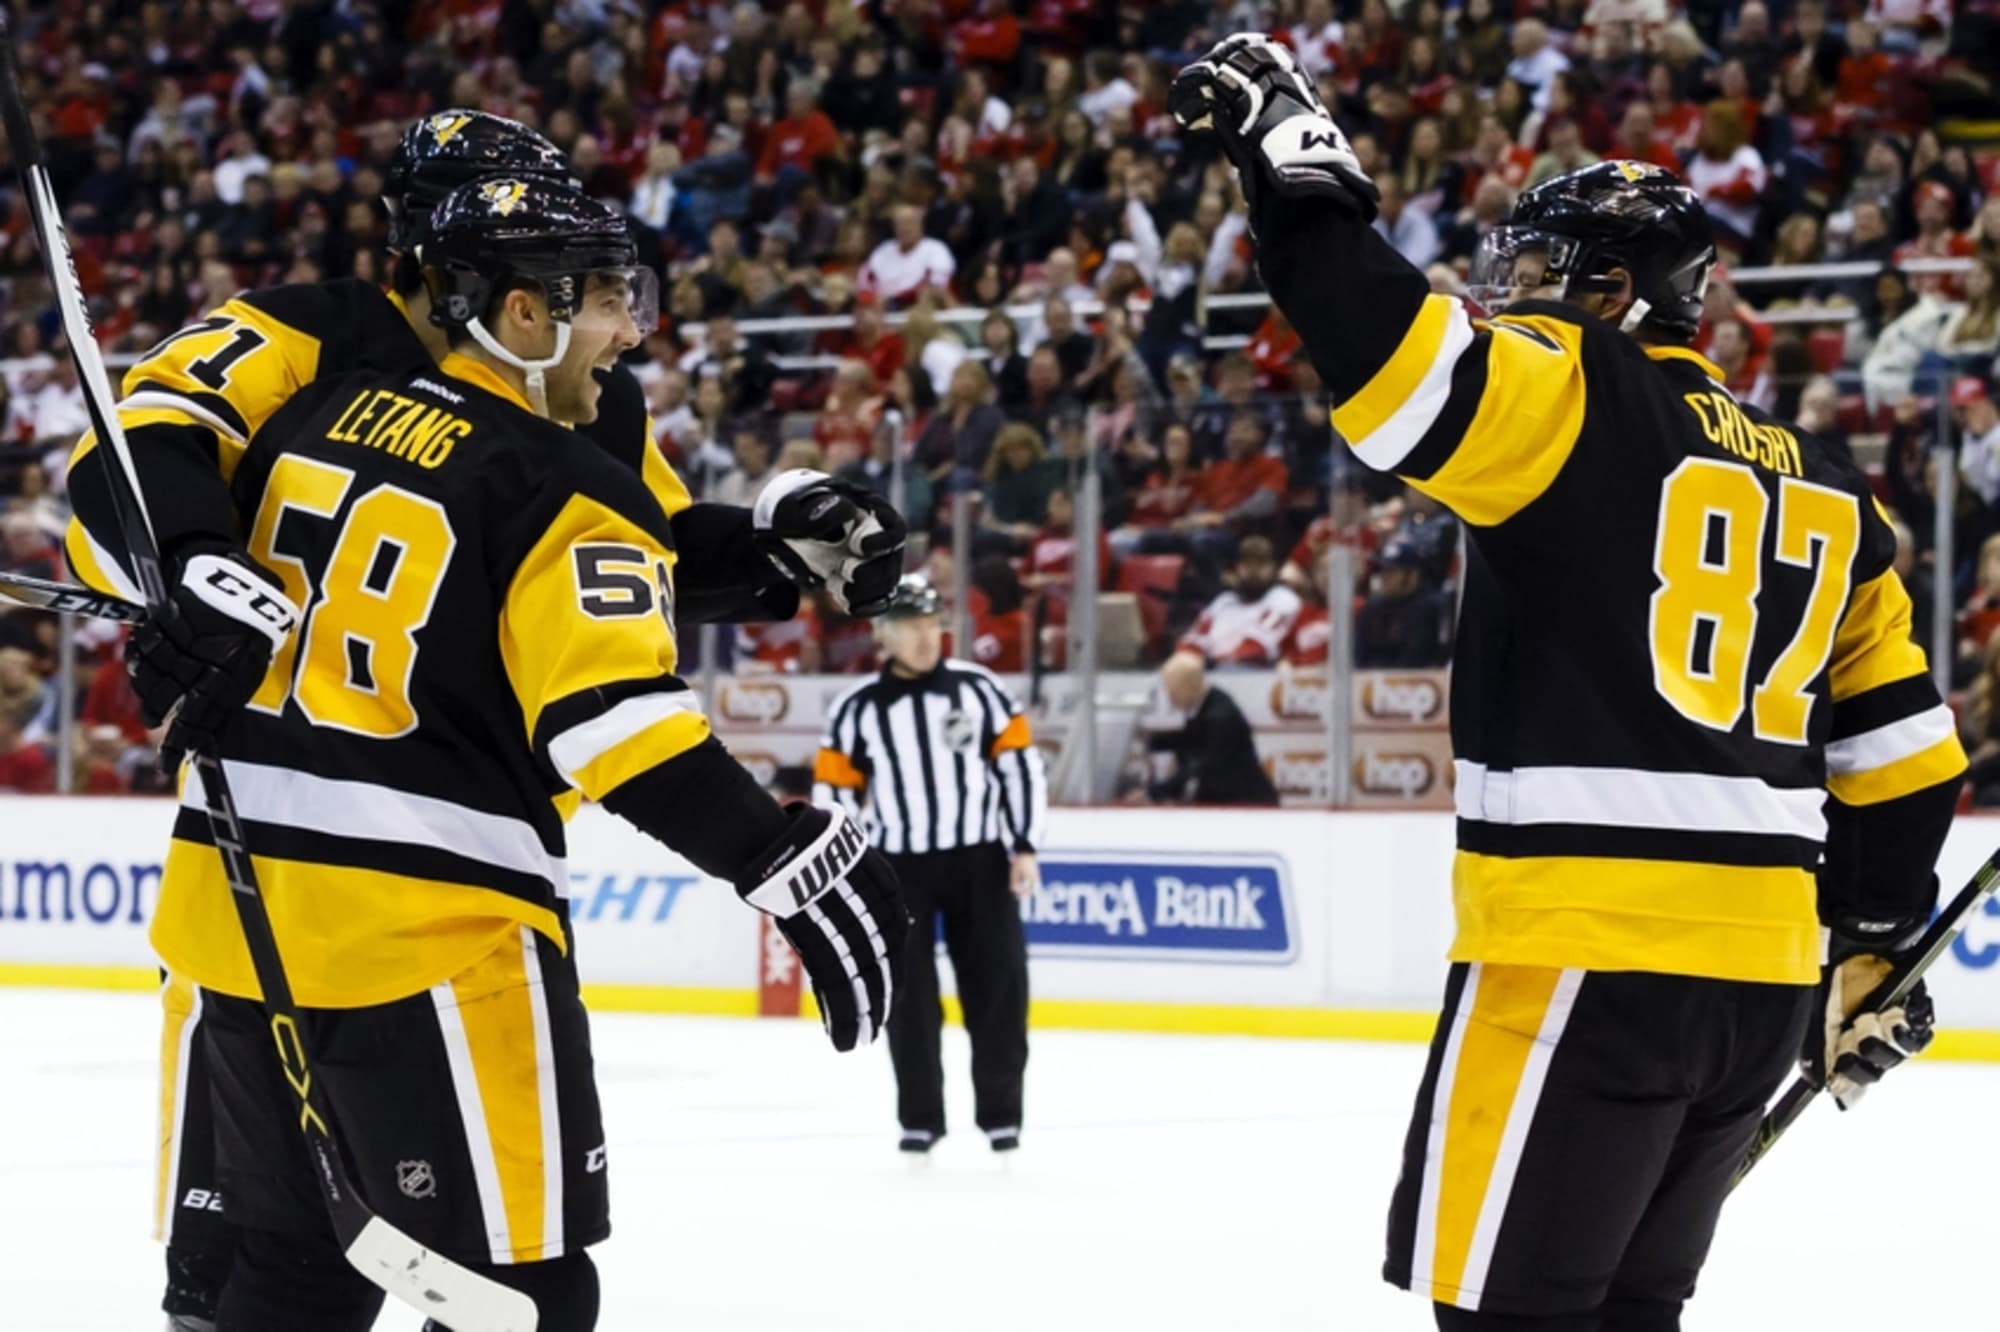 Malkin, Penguins surge past Flames with 5 goals in the third